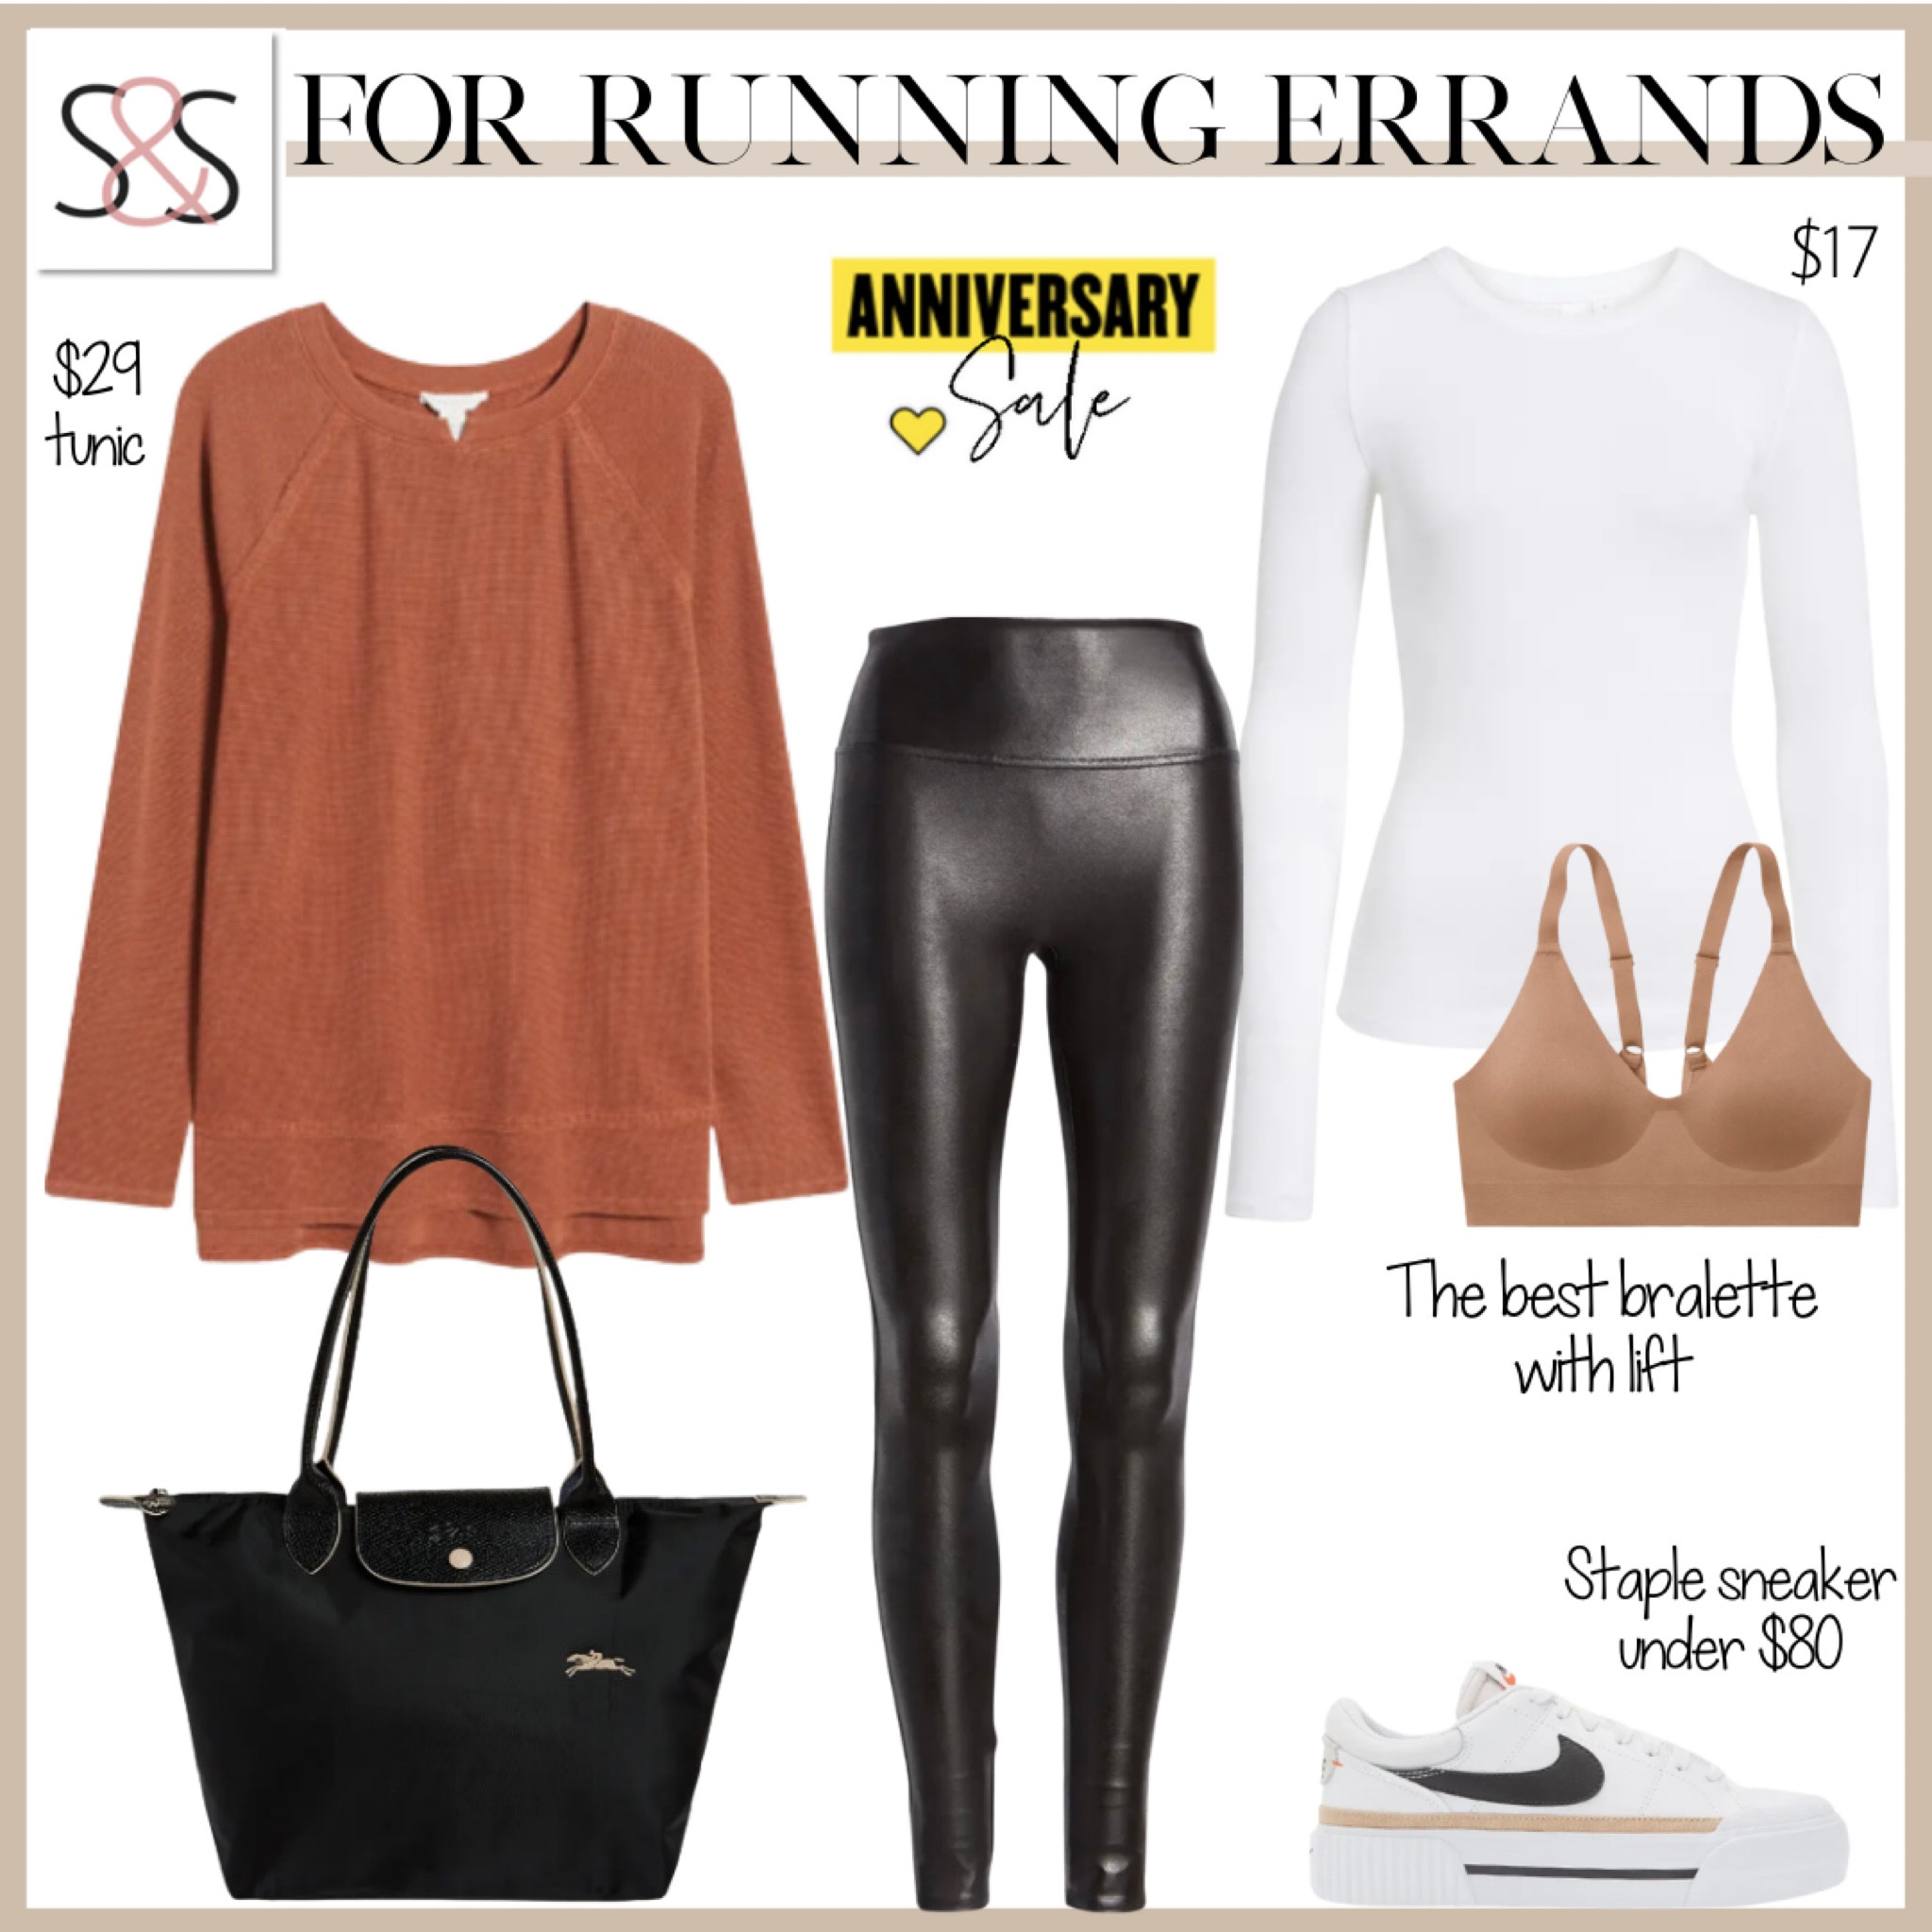 The “Perfect Fit Faux Leather Leggings” can be worn so many